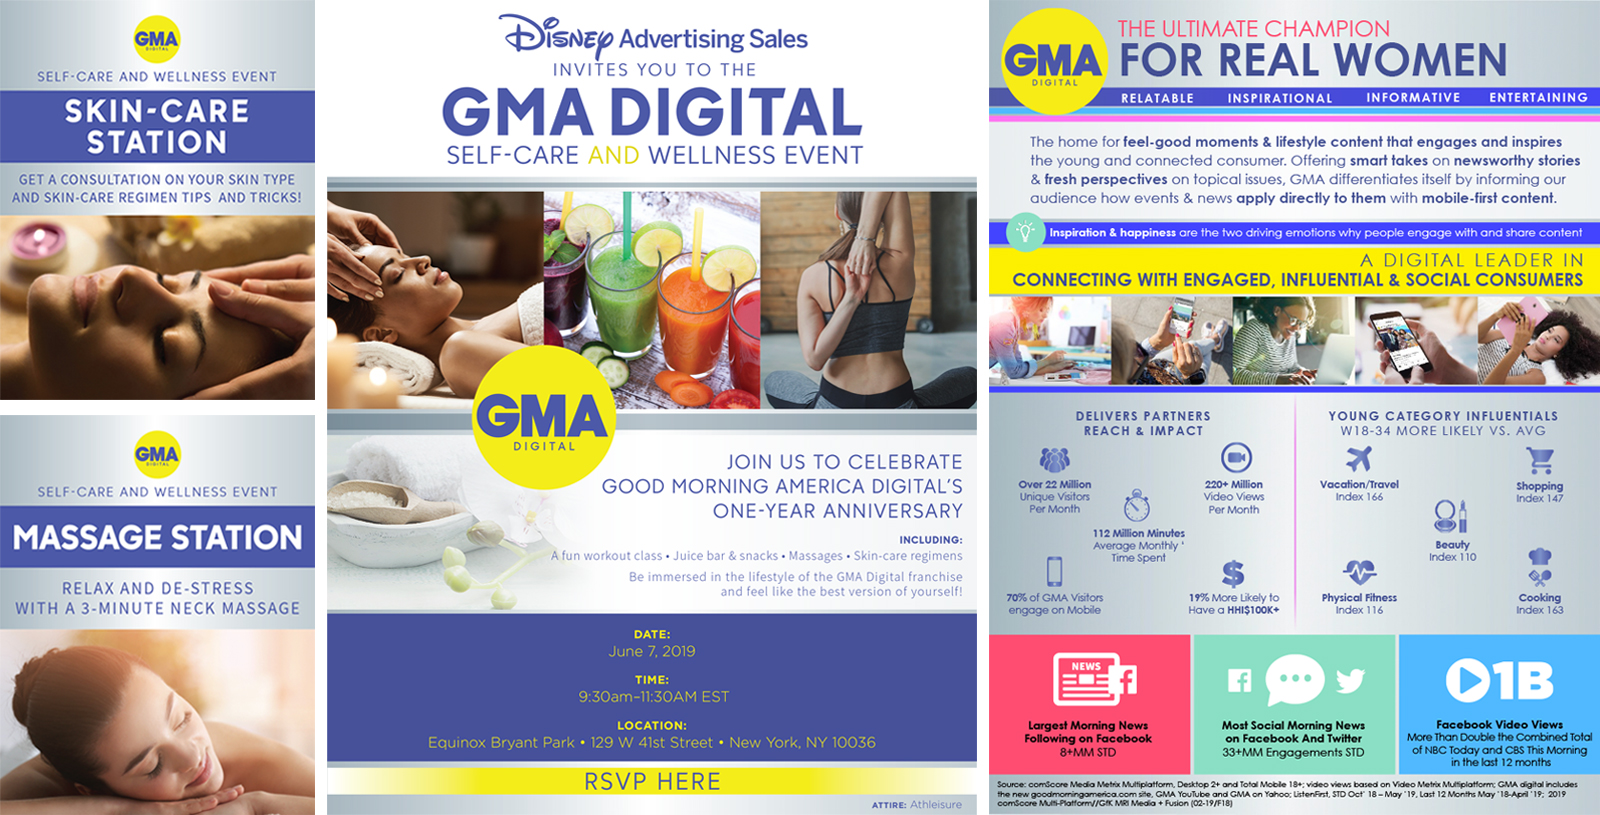 Good Morning America Digital Wellness Events | Event Design, Event Collateral, Client Experiences, Promotional Events | Barbour Design